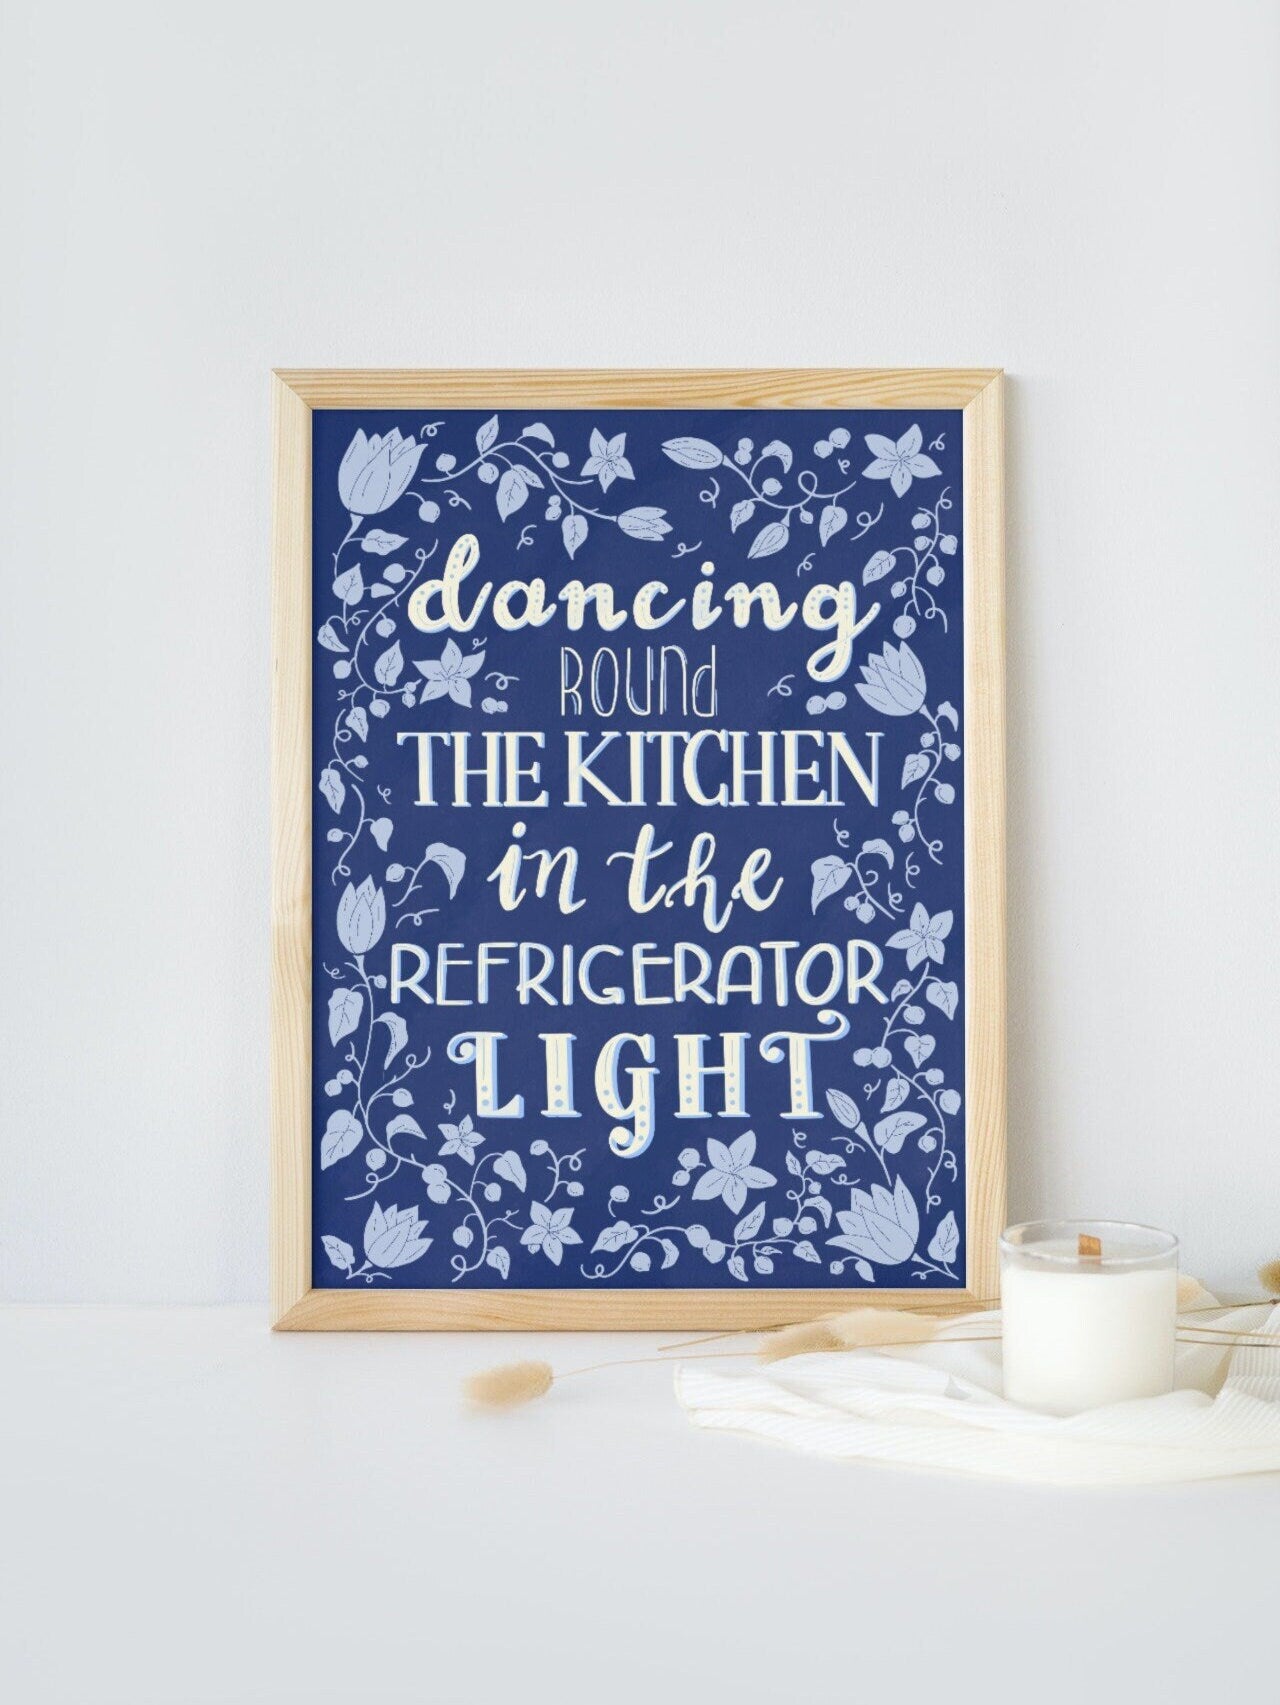 Dancing Round The Kitchen in The Refrigerator Taylor swift All Too Well Quote, chinoiserie floral print, vintage print artwork in the U.K.